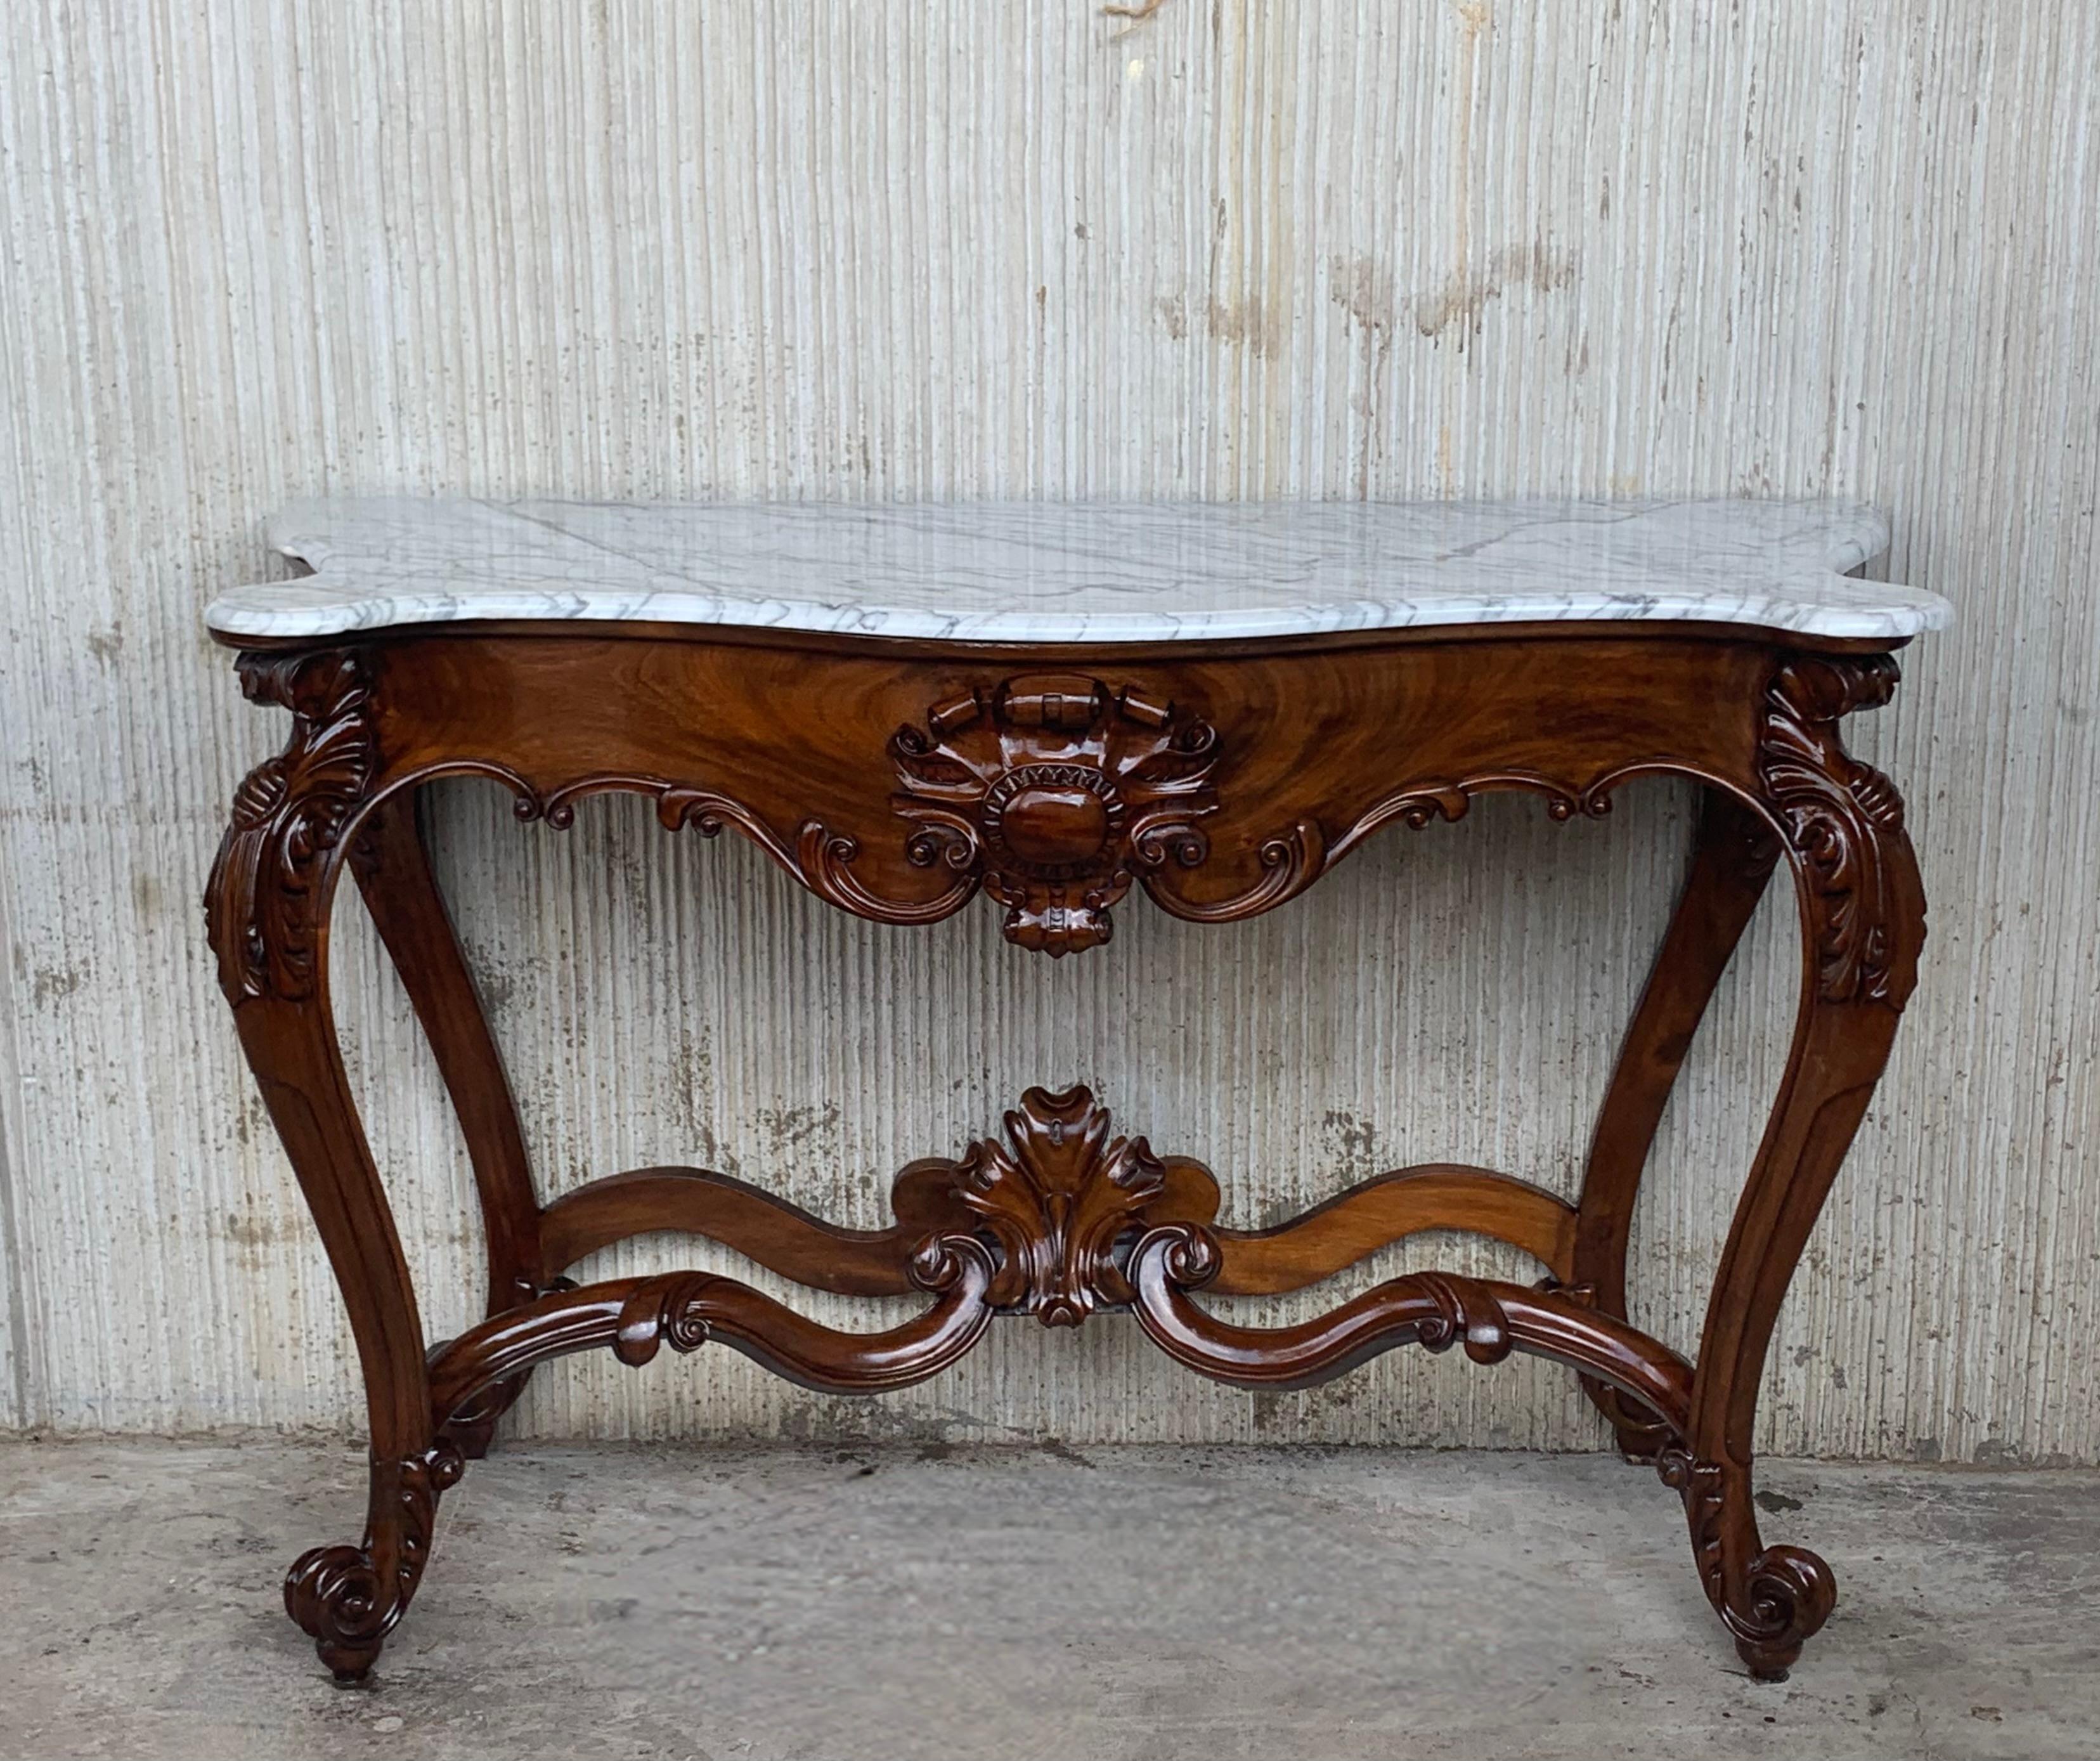 Large French Regency Carved Walnut Console Table with White Marble Top '2 Avai' In Good Condition For Sale In Miami, FL